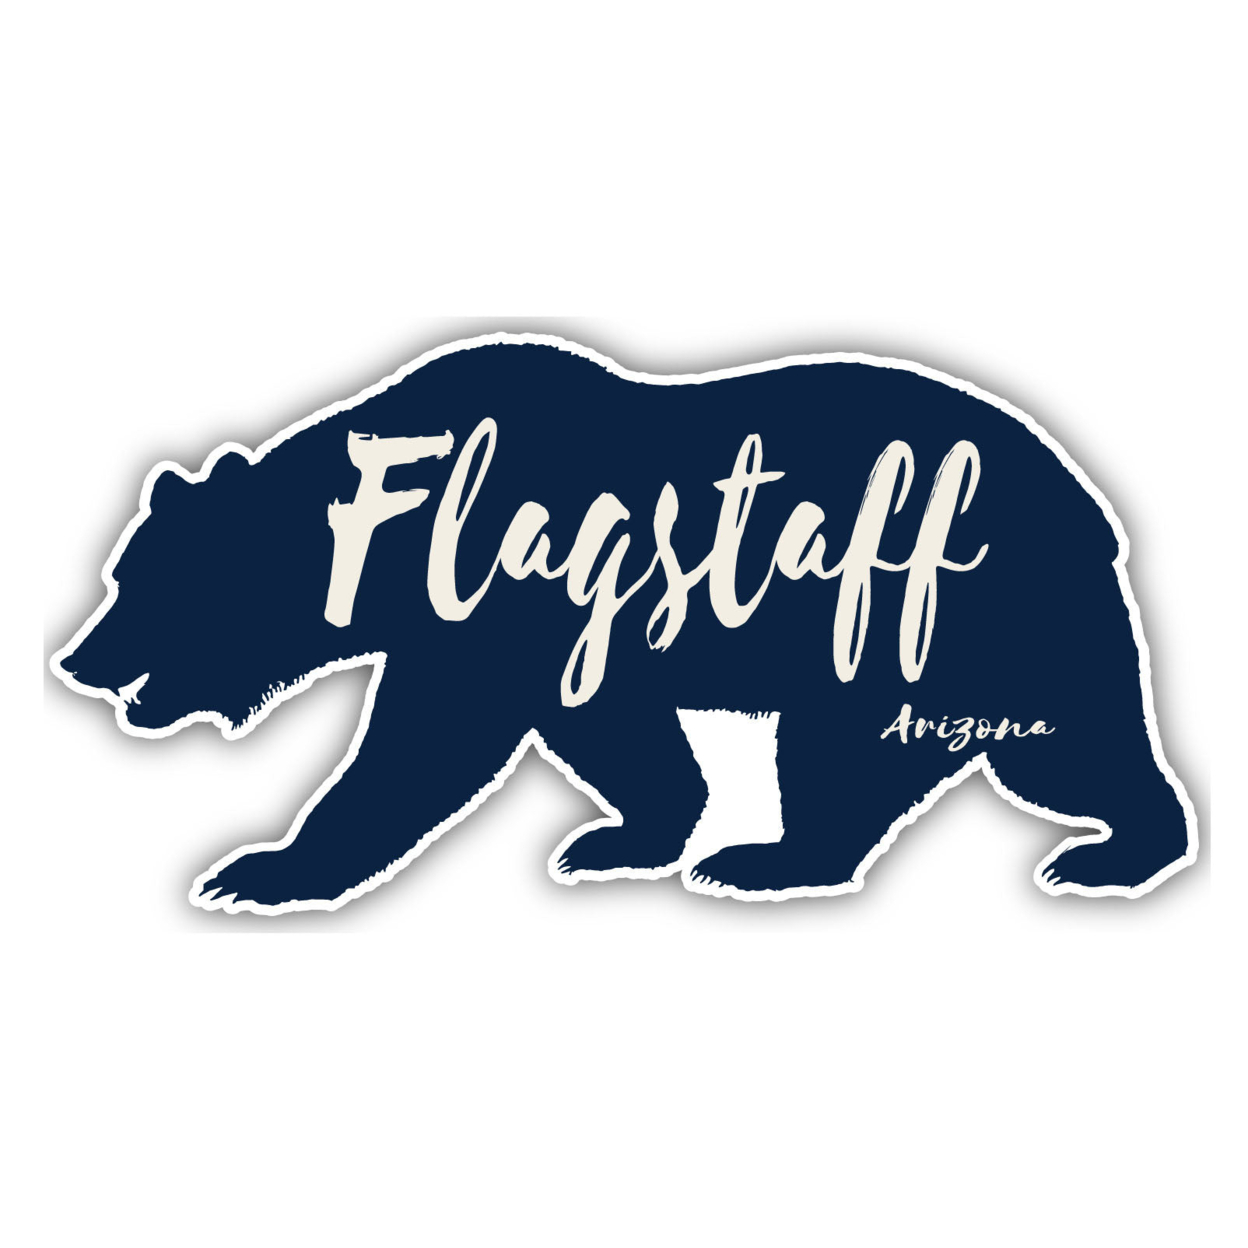 Flagstaff Arizona Souvenir Decorative Stickers (Choose Theme And Size) - 4-Pack, 12-Inch, Camp Life